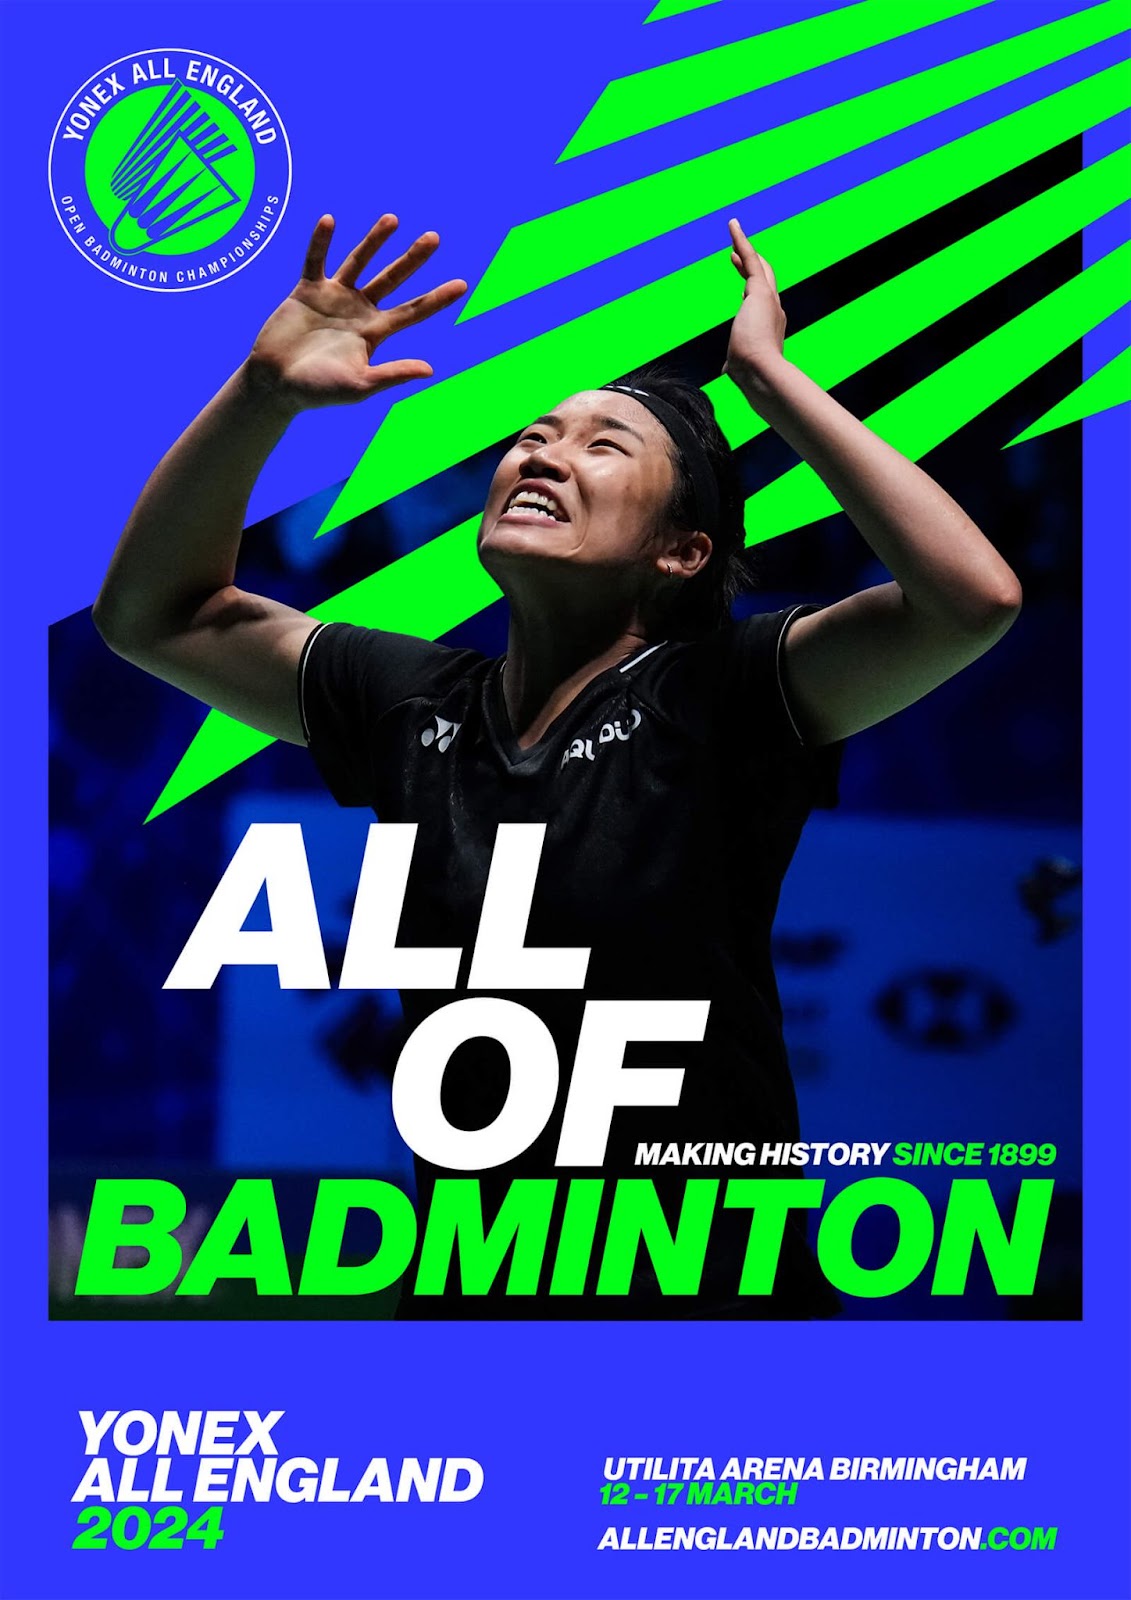 Branding and visual identity artifact from Revitalizing a Timeless Championship: YONEX All England’s Brand Transformation article